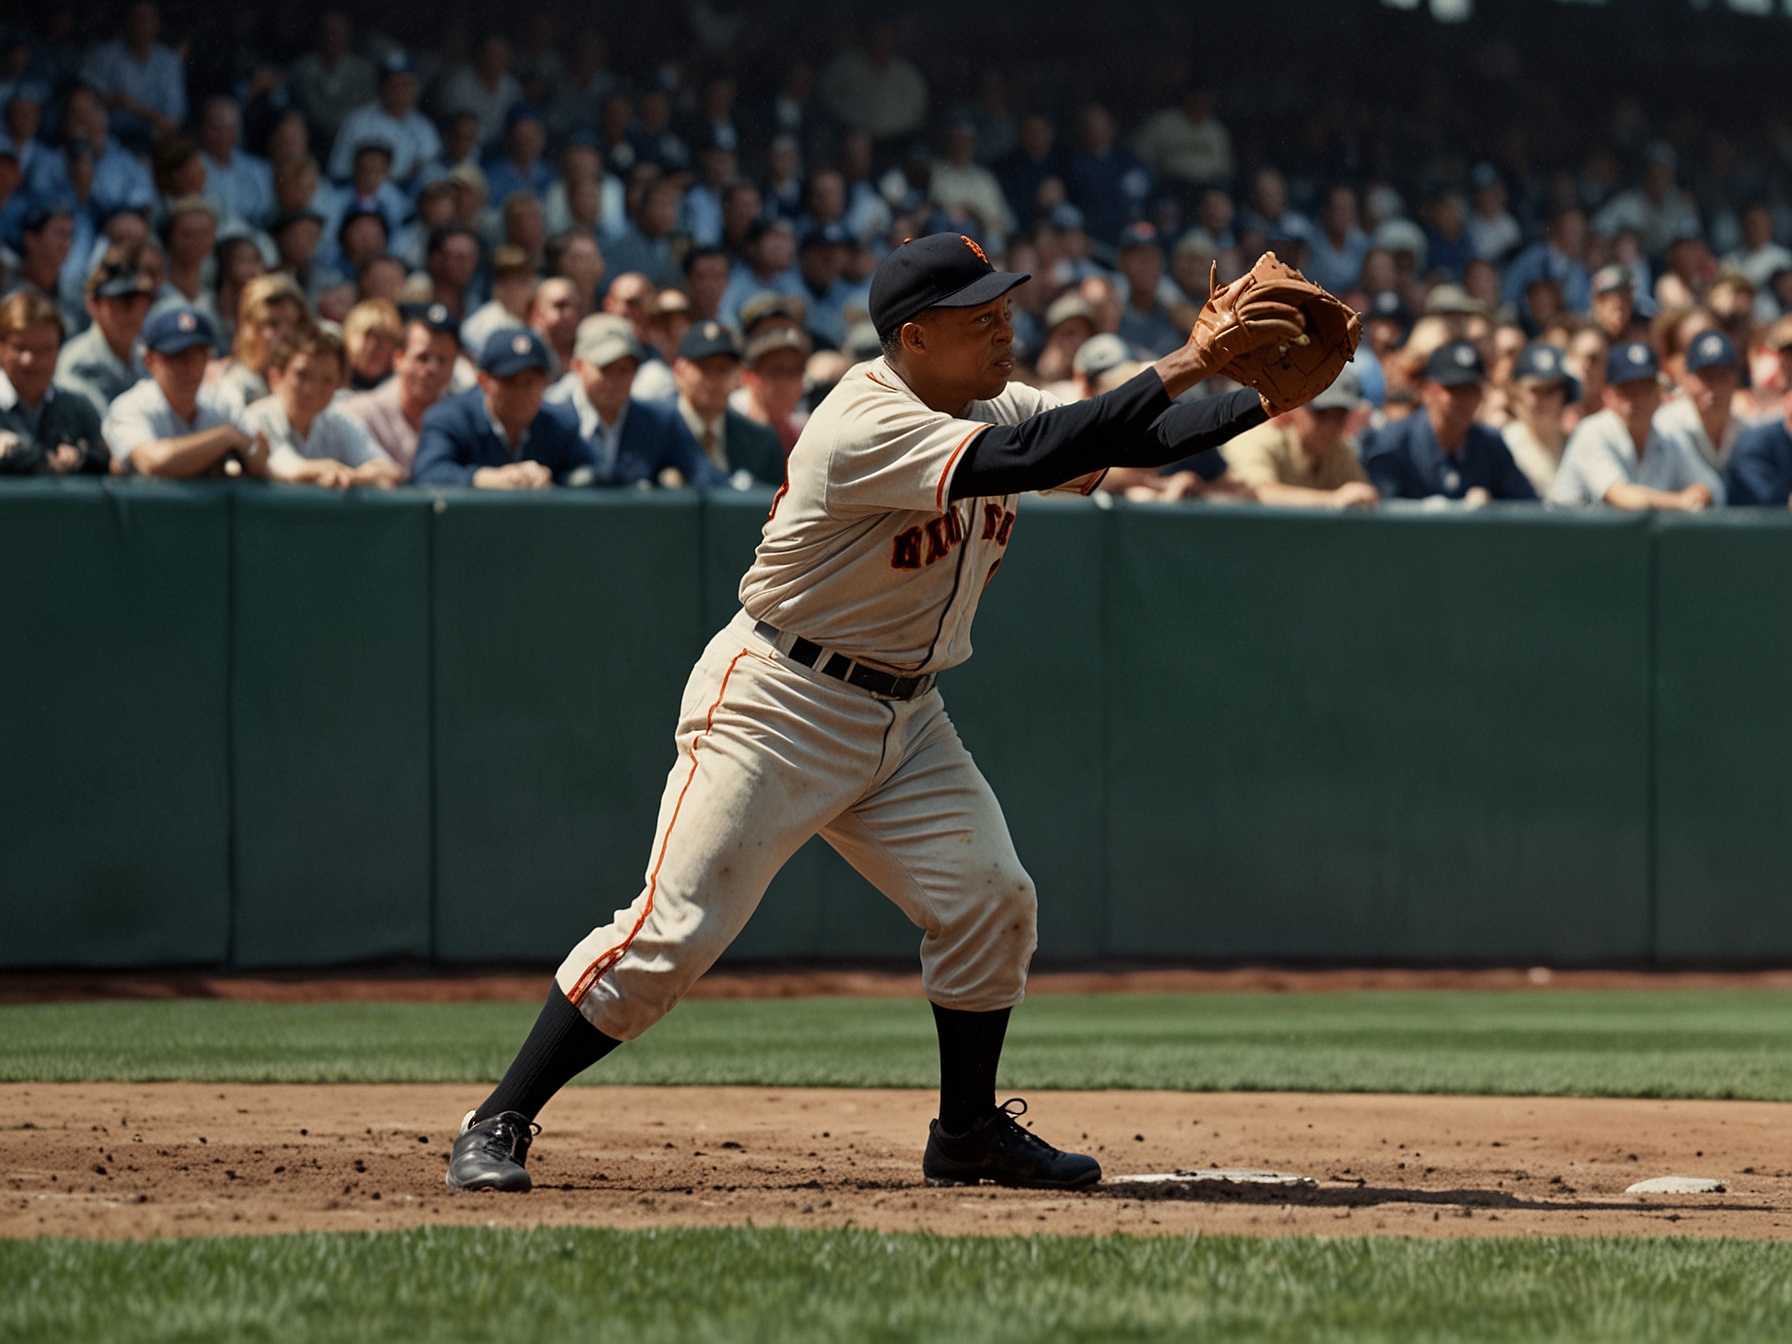 Willie Mays making his iconic over-the-shoulder catch in the 1954 World Series, showcasing his exceptional fielding skills and athleticism, forever etched in baseball history.